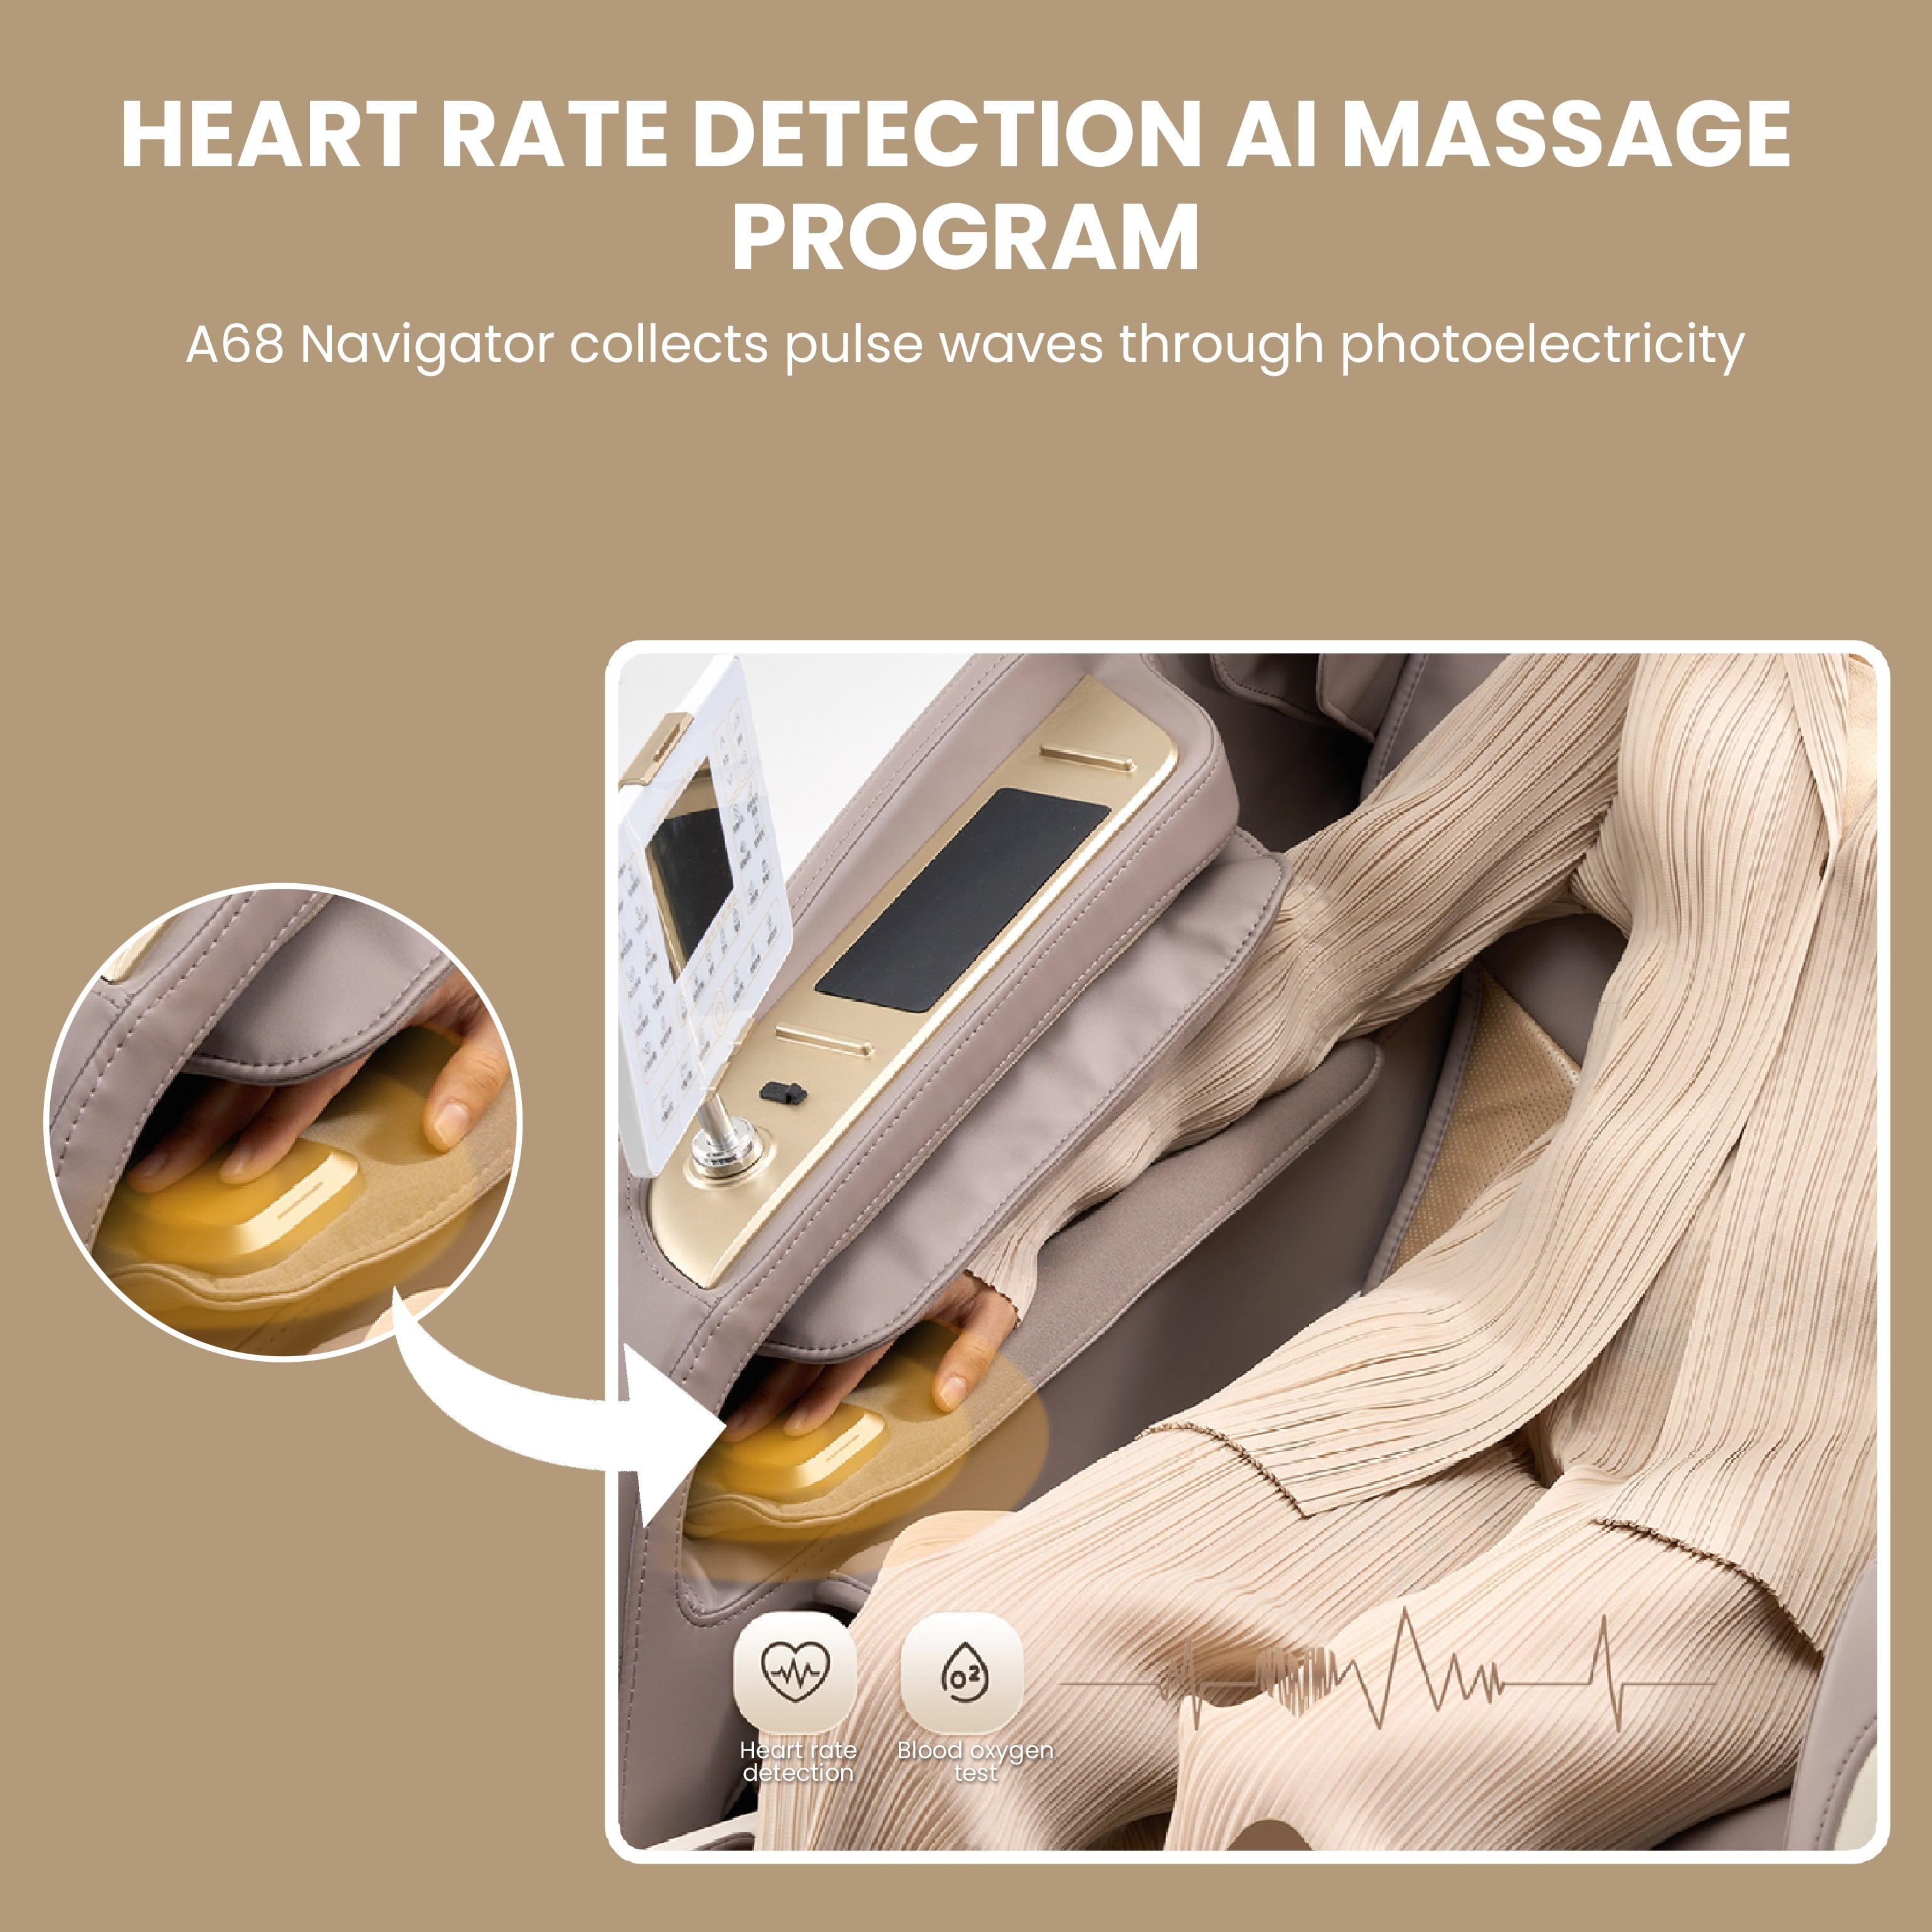 Heart rate detection AI massage program on Royal Magestic Pro Massage Chair with pulse wave collection and 3D movement technology